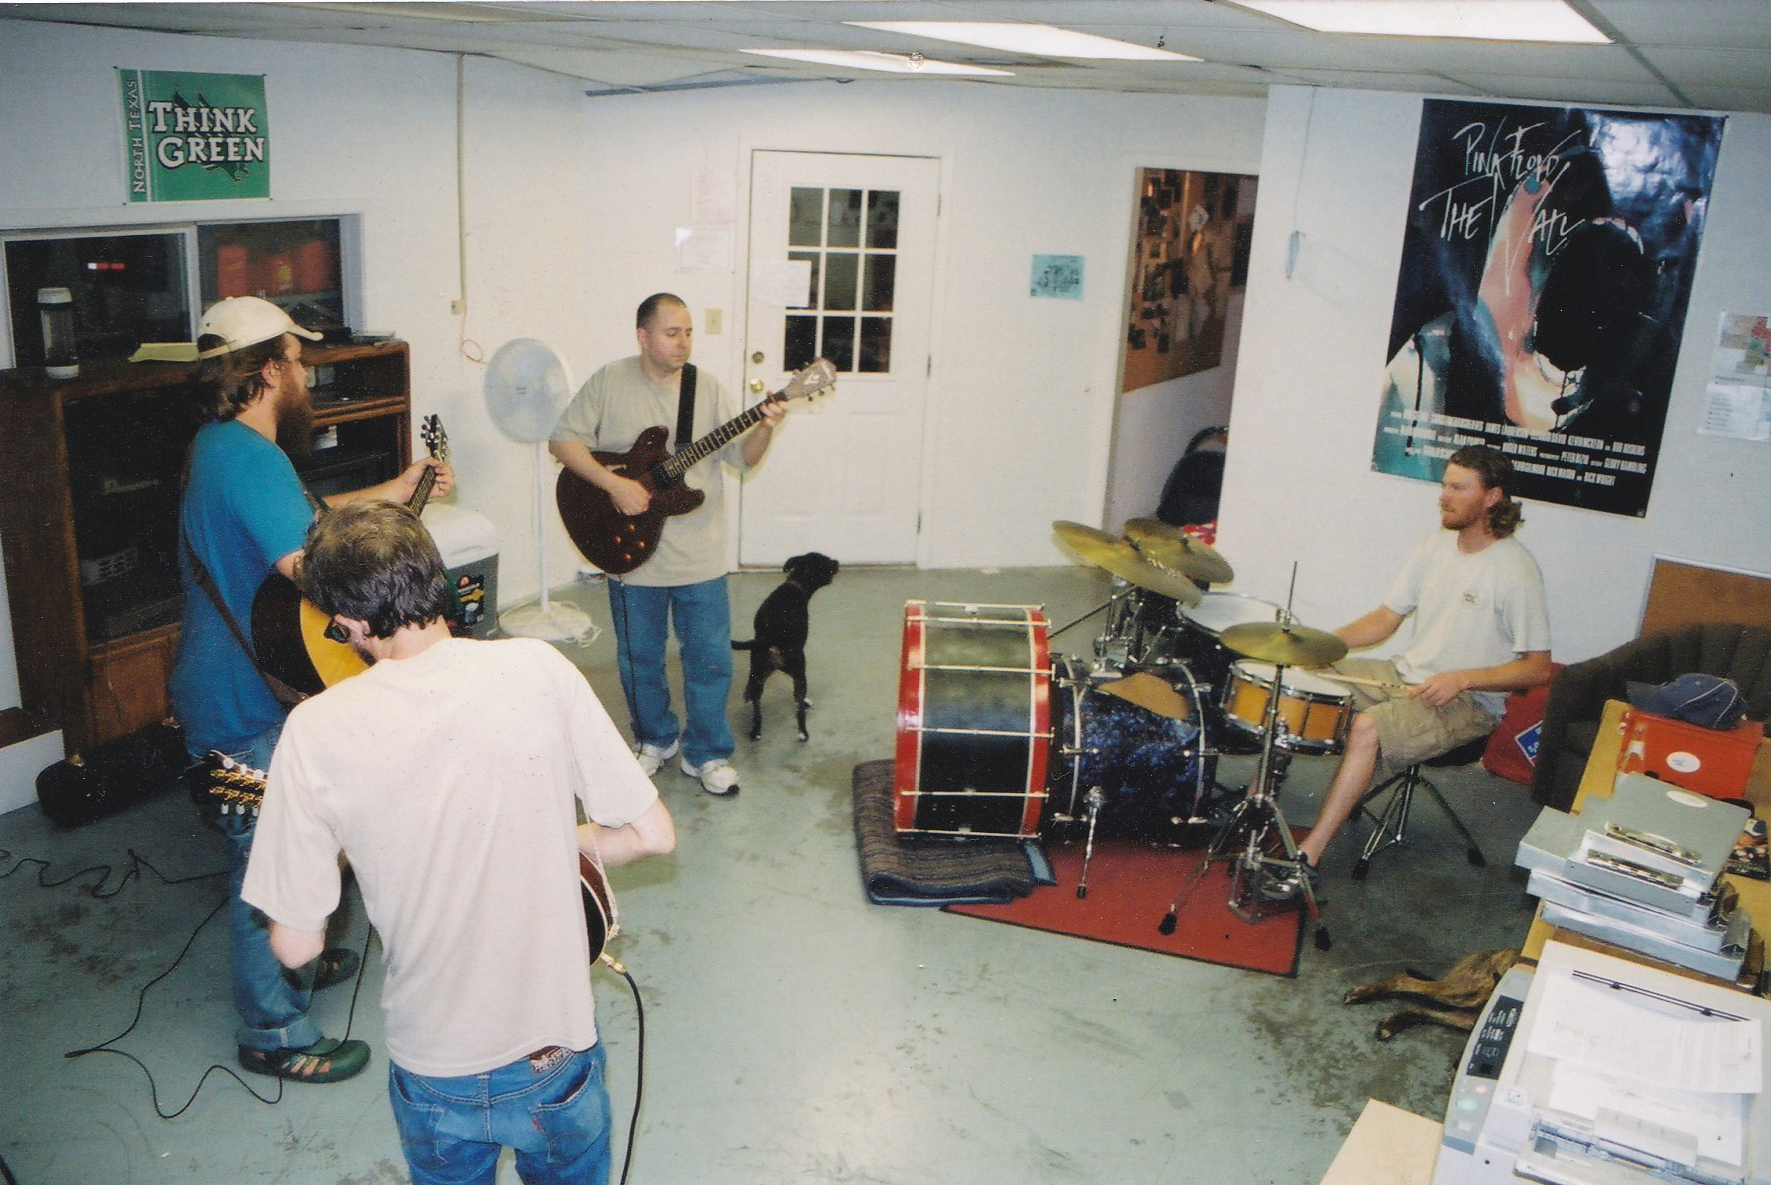 Some early Little Guys employees playing music in a jam room. Three guys are playing guitars and one is sitting at a drumset.